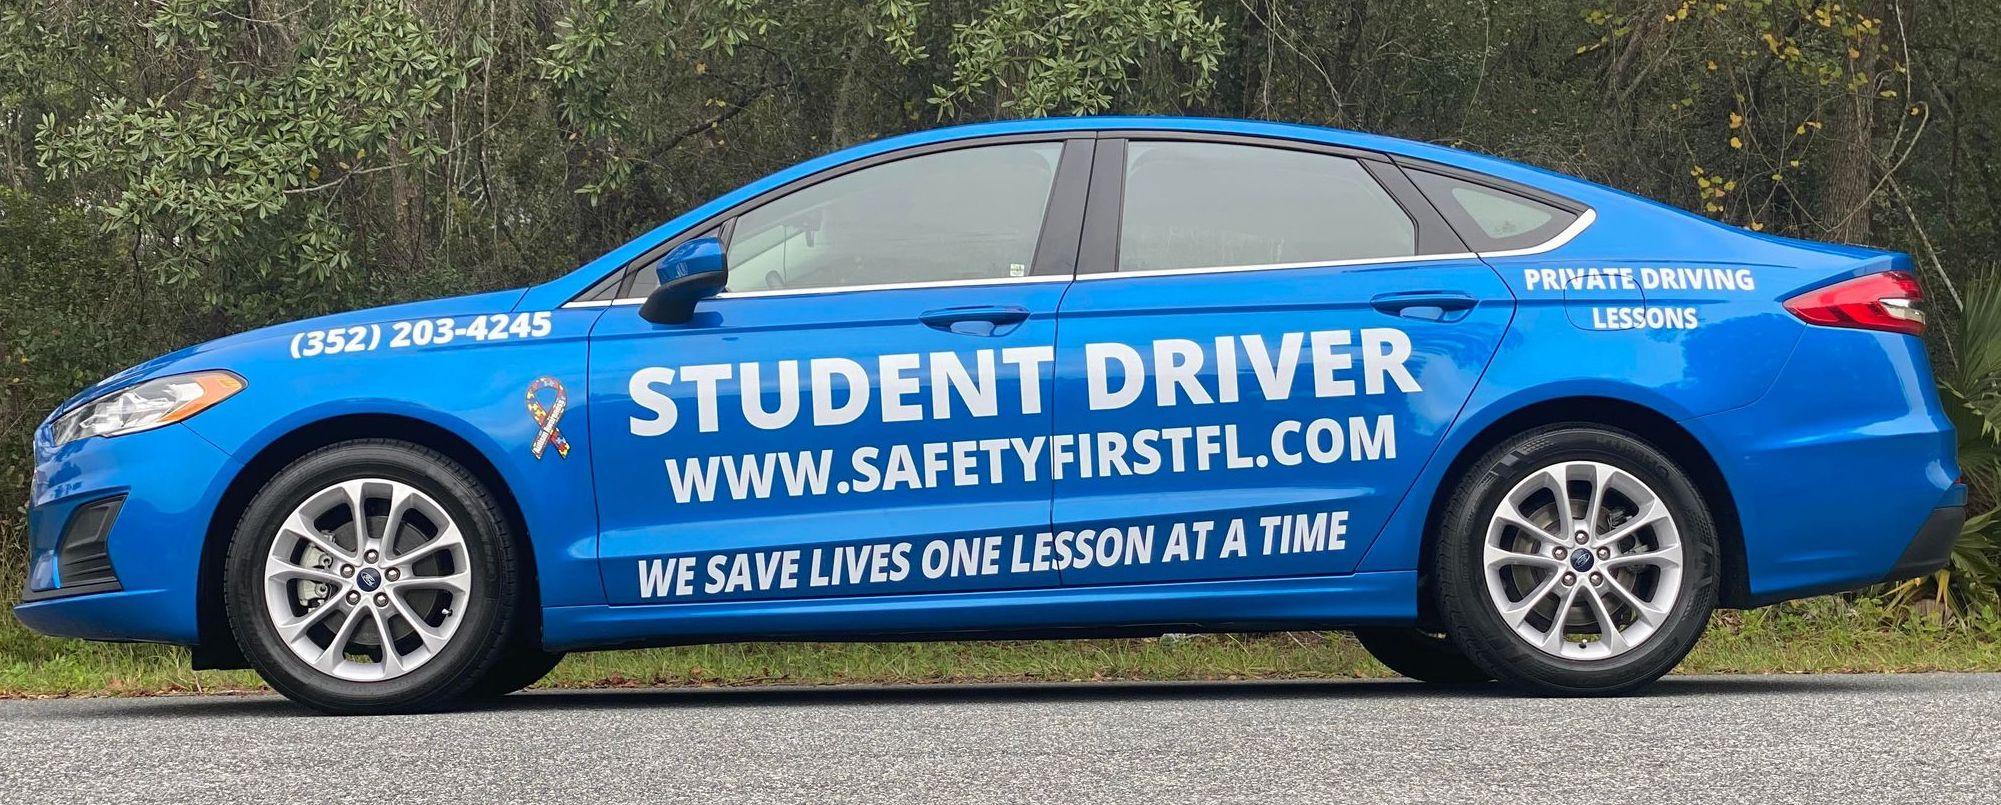 Safety First Driving Academy, LLC